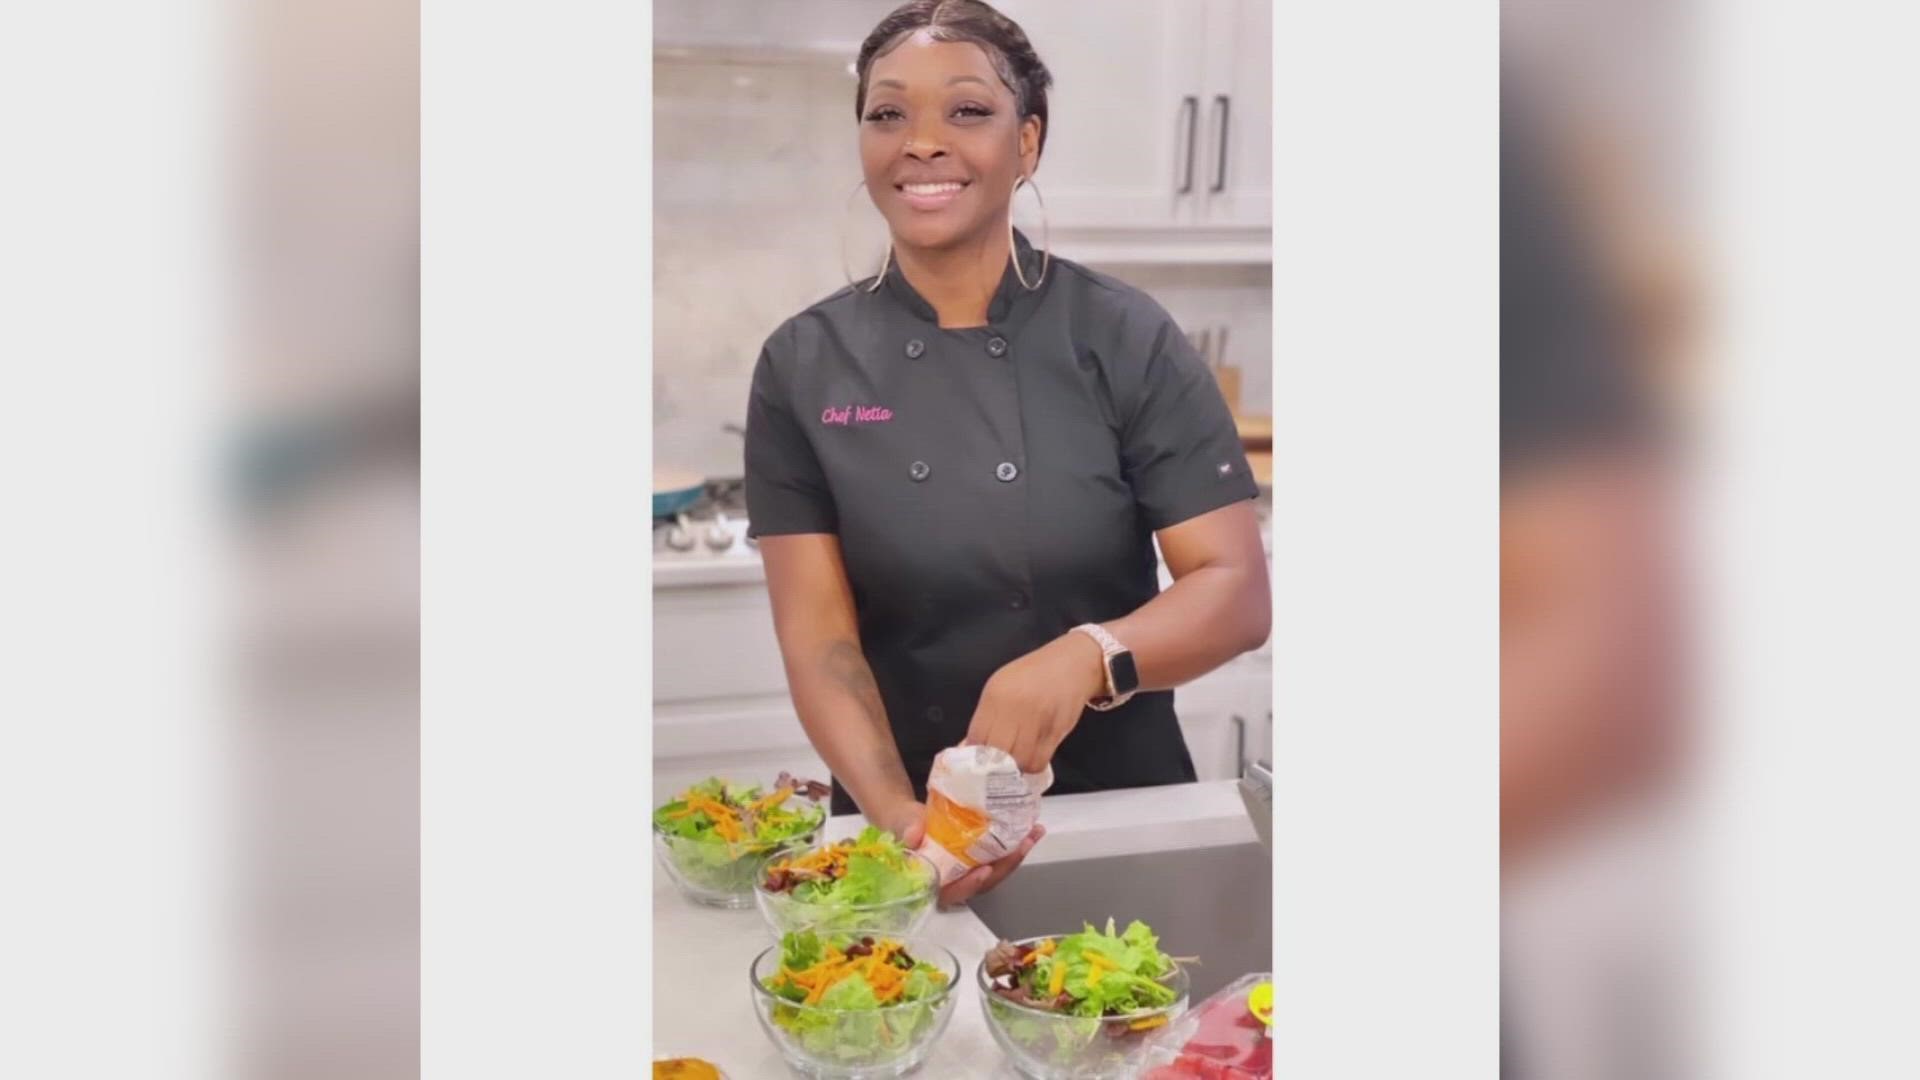 Kanetia Durden, known as "That Girl Netia", started her catering company right before Covid, but she didn't let that stop her from following her dreams.